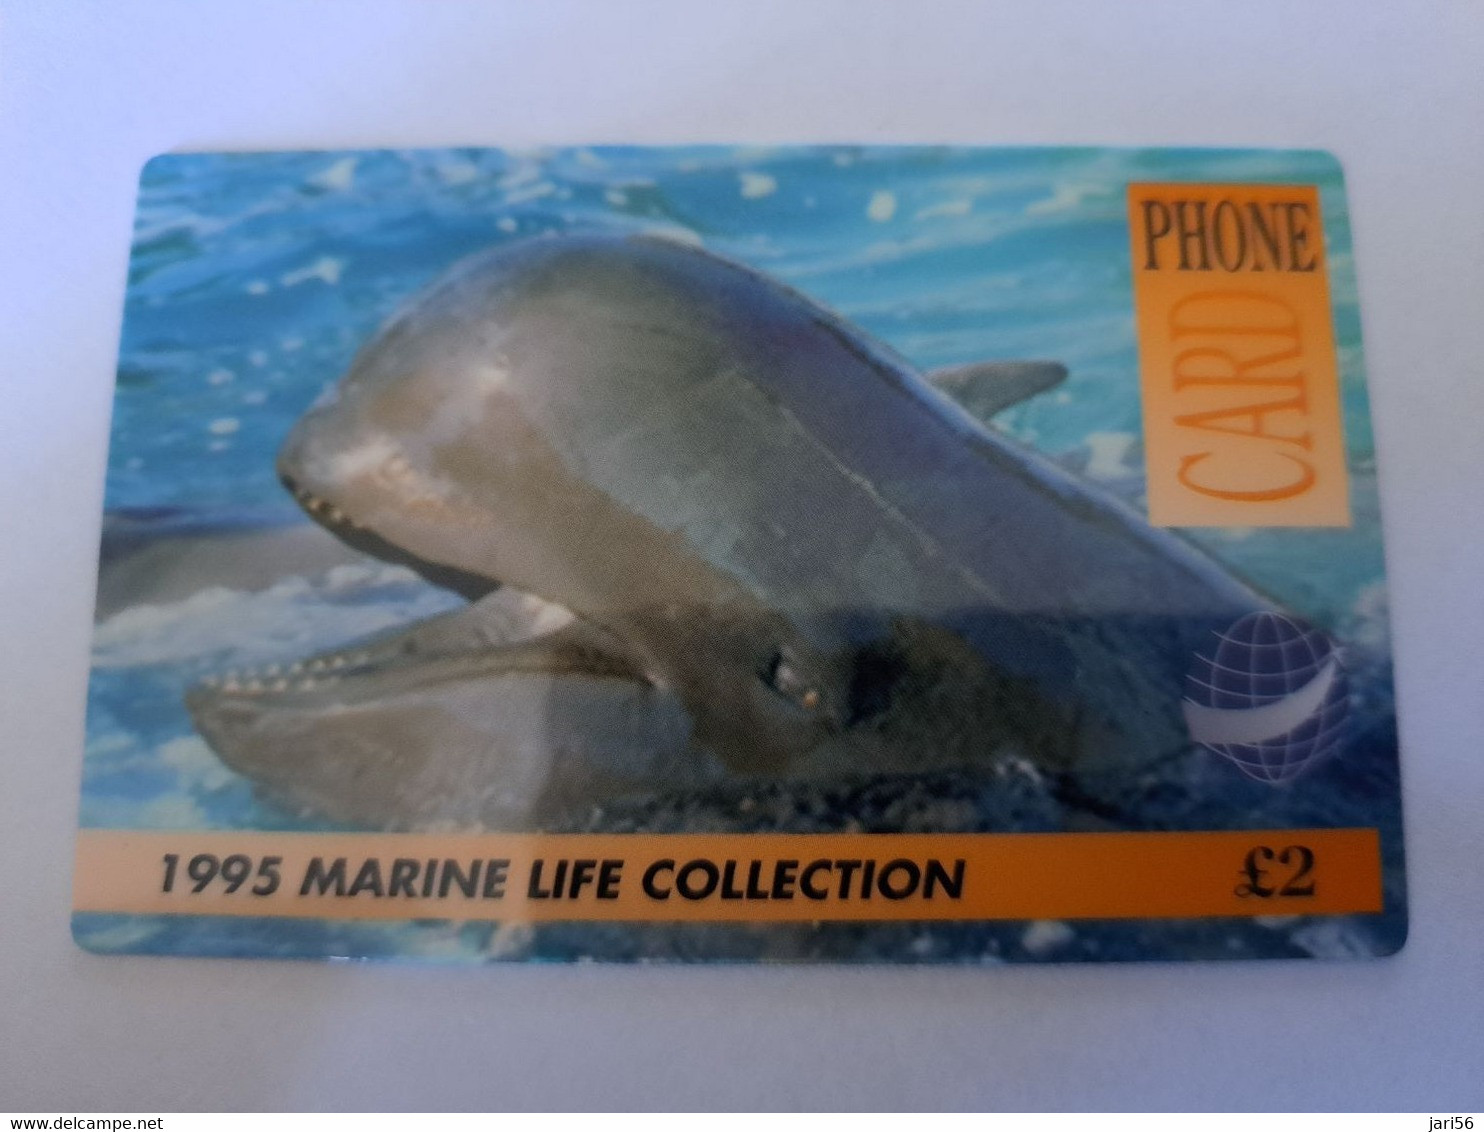 GREAT BRITAIN   2 POUND  /  WHALE /DOLPHIN     /    DIT PHONECARD    PREPAID CARD      **12129** - [10] Collections